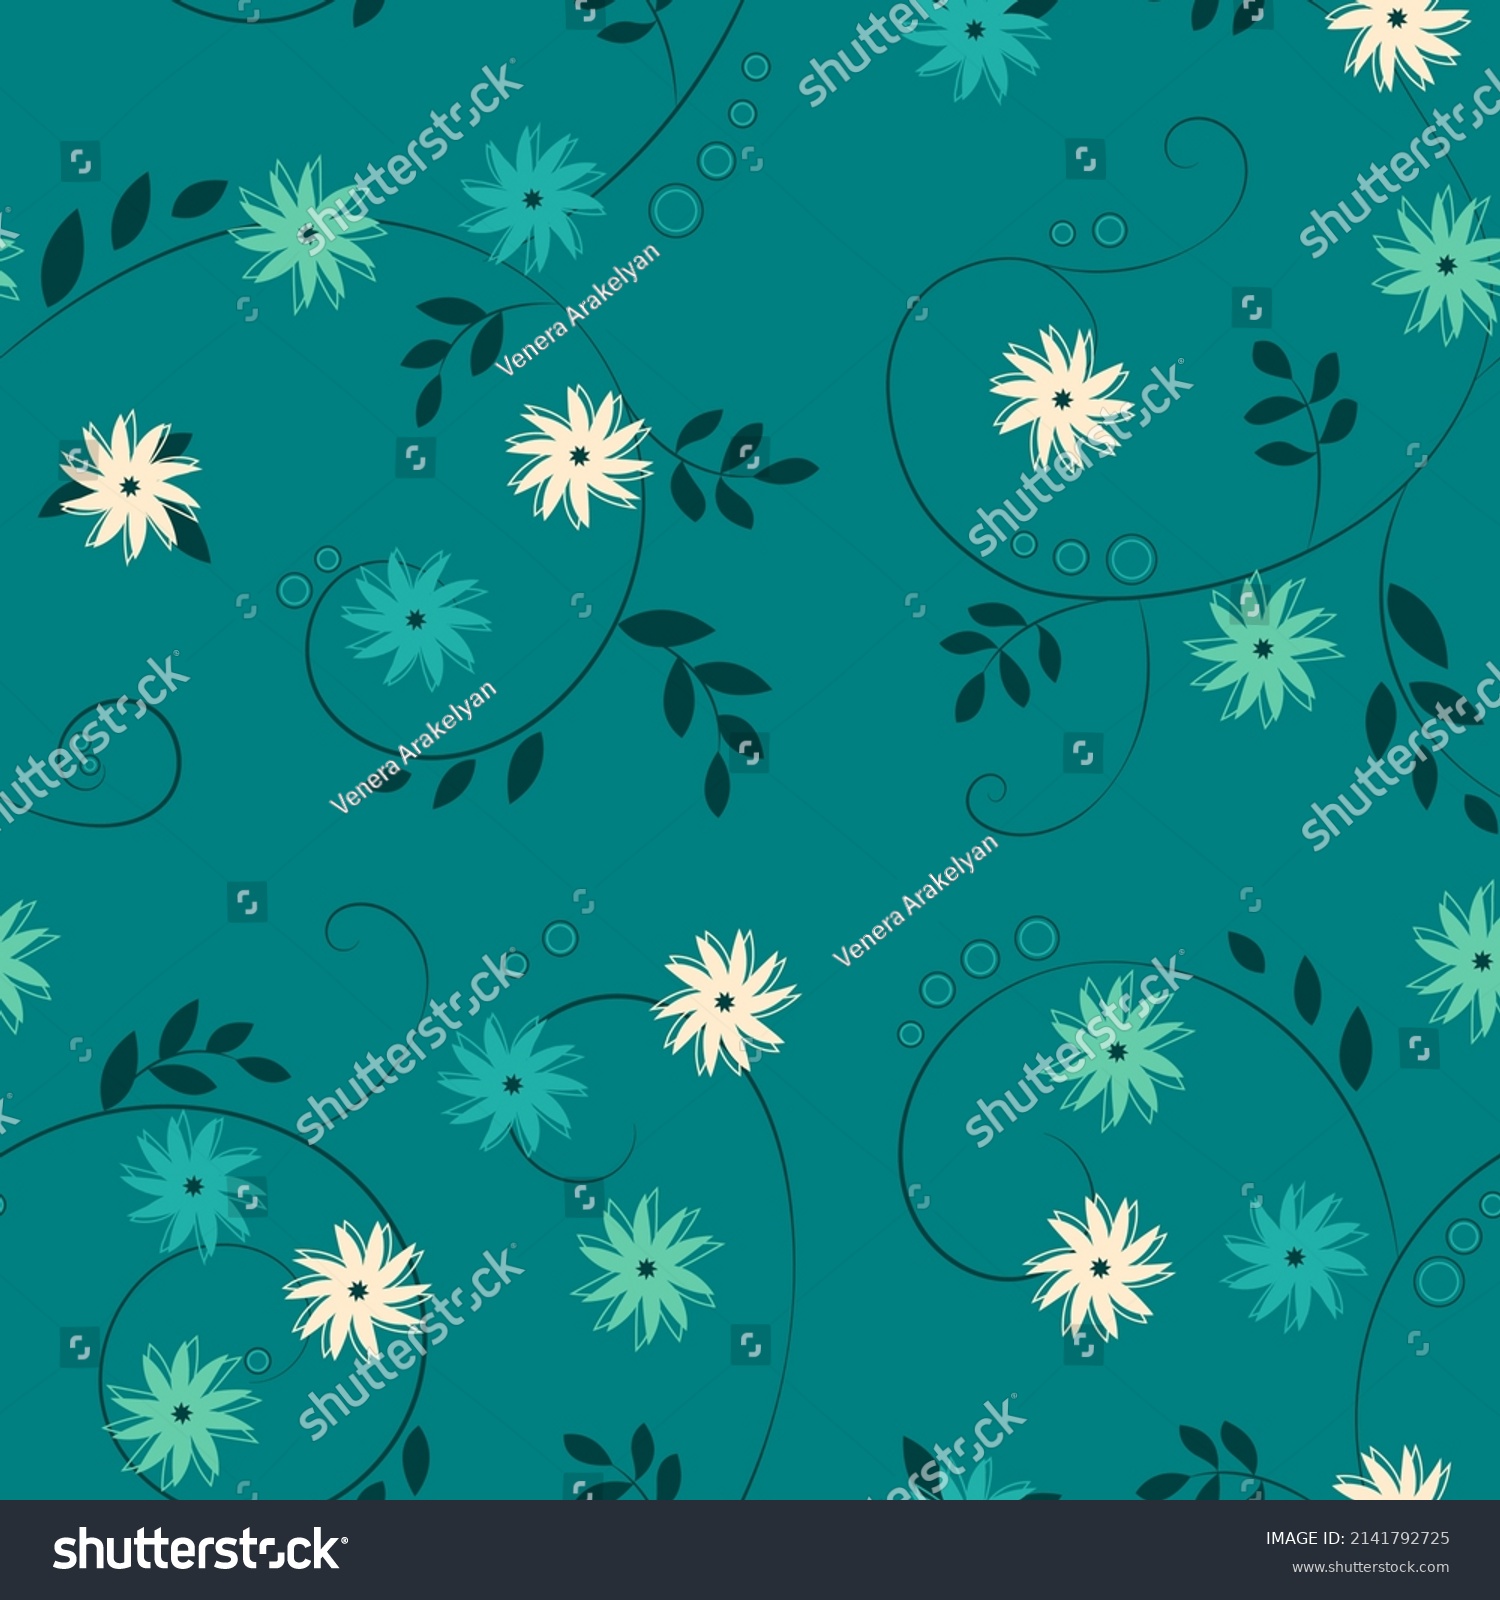 SVG of Abstract vector seamless floral pattern. Small Seafoam blue, topaz and white flowers on dark deep aqua background with swirl branches. Vector illustration. svg